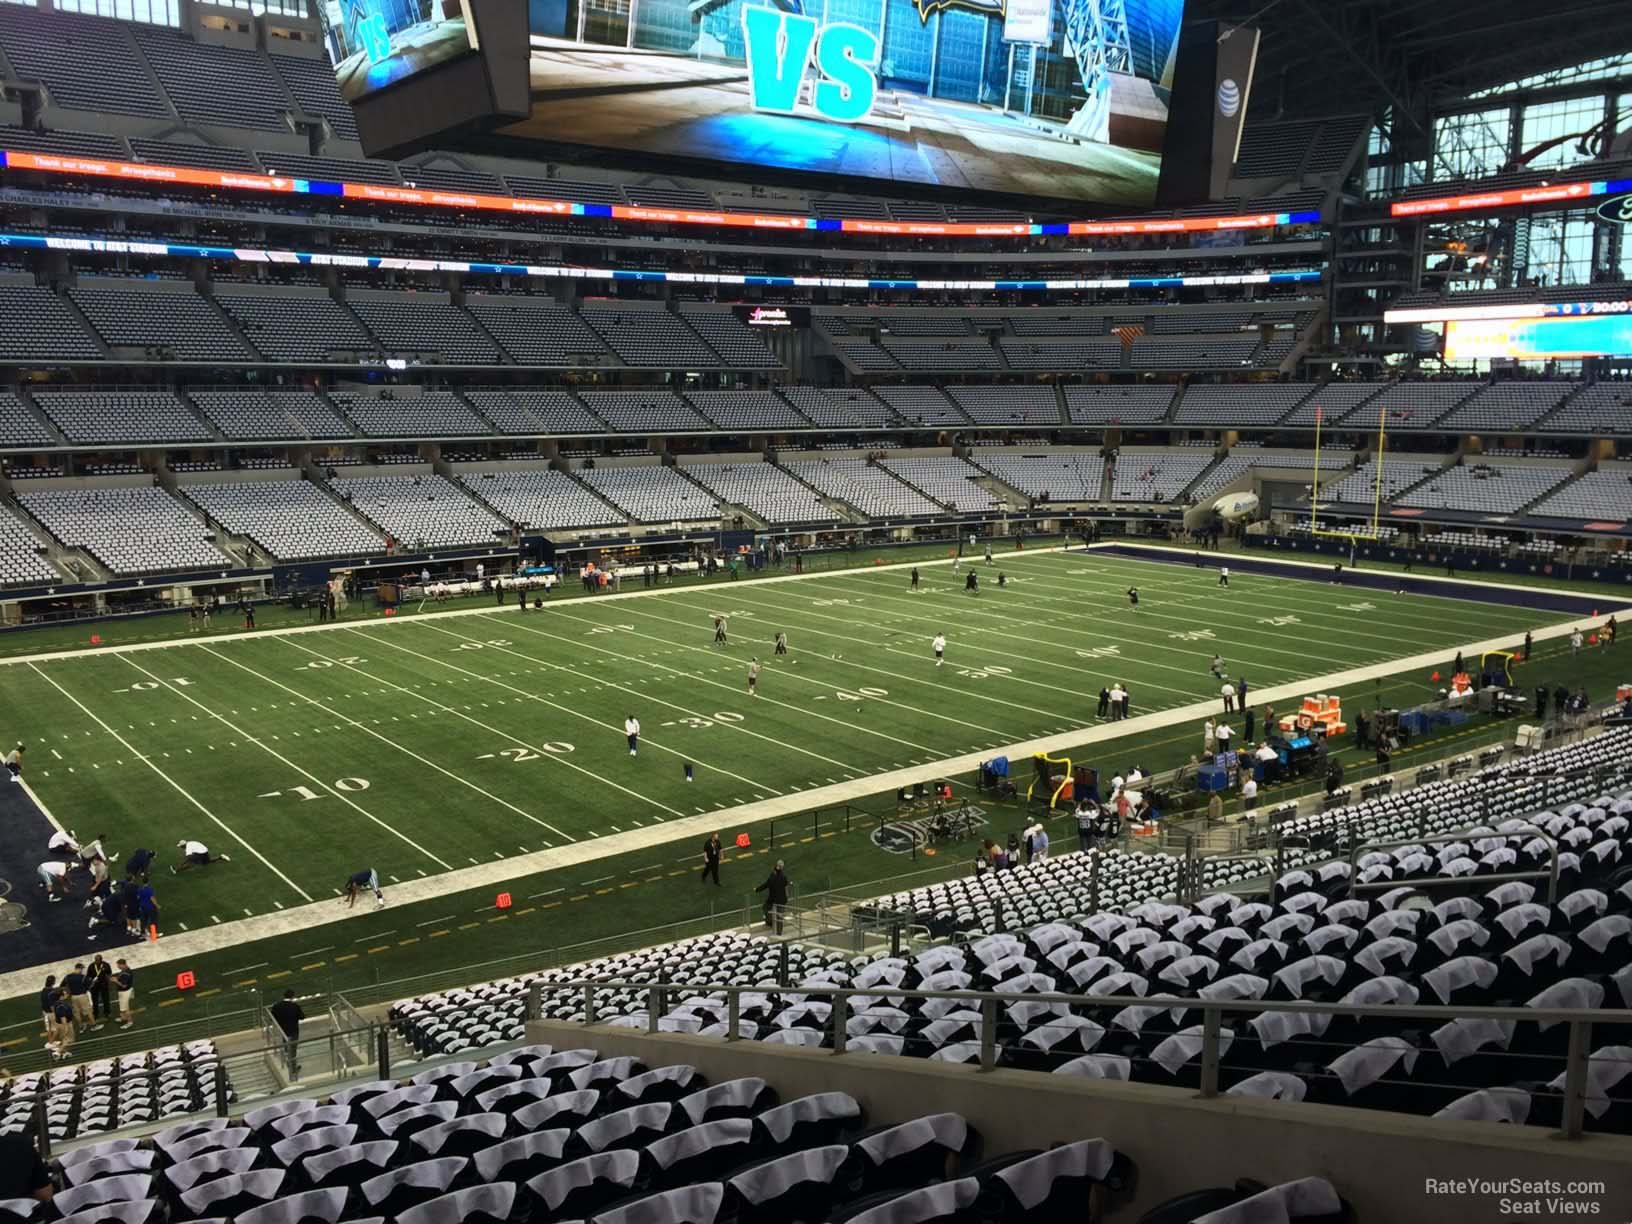 section 215, row 13 seat view  for football - at&t stadium (cowboys stadium)